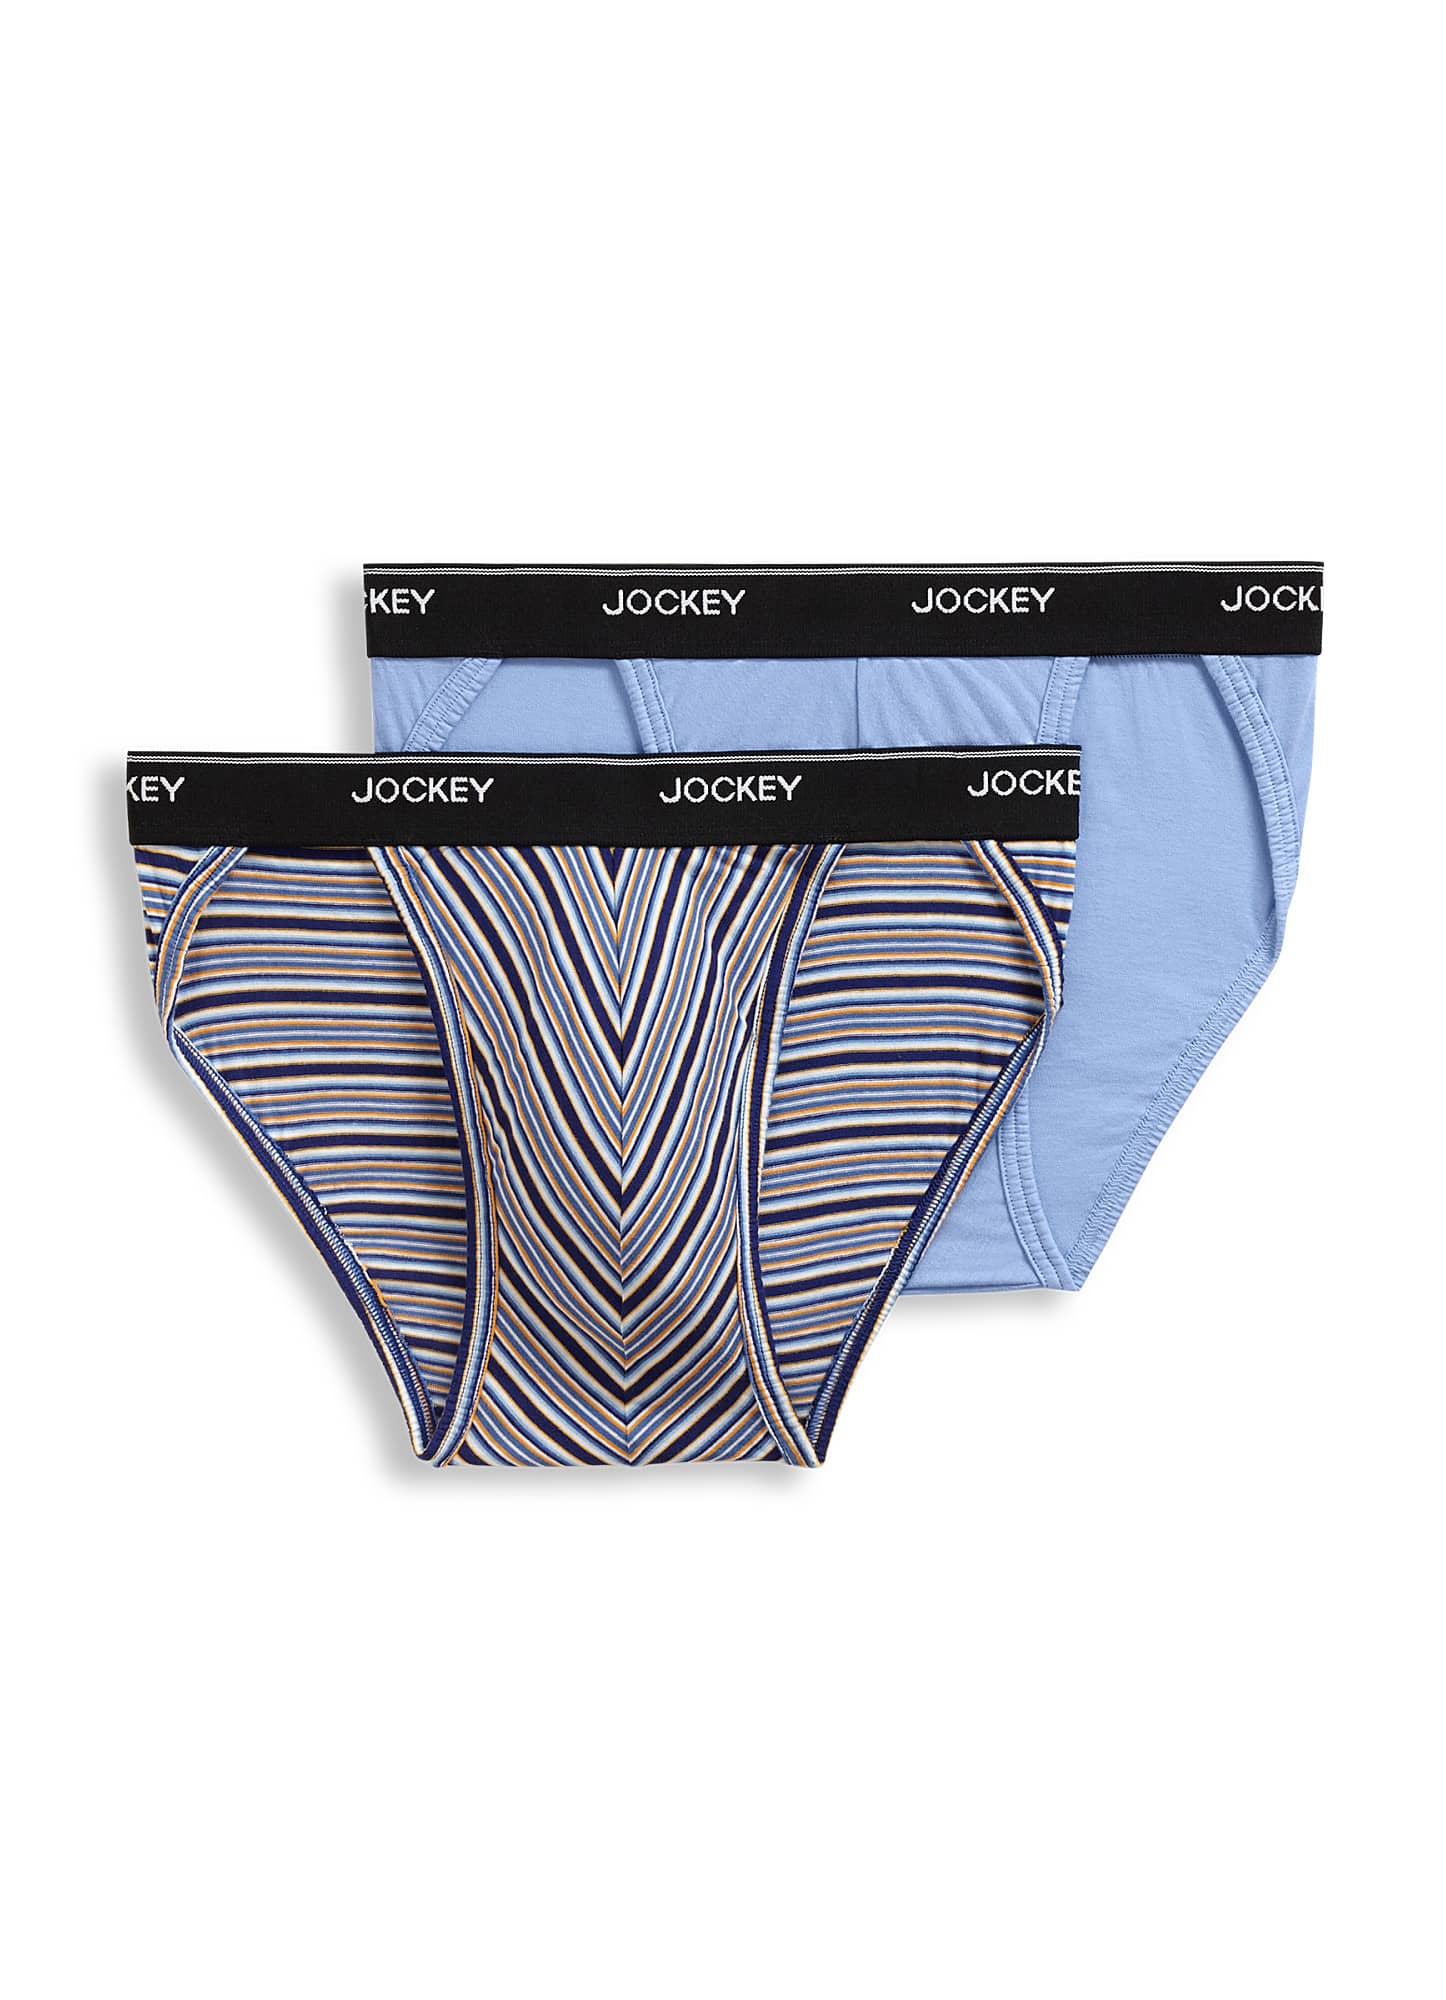 Wholesale Jockey String Bikini Mens Products at Factory Prices from  Manufacturers in China, India, Korea, etc.